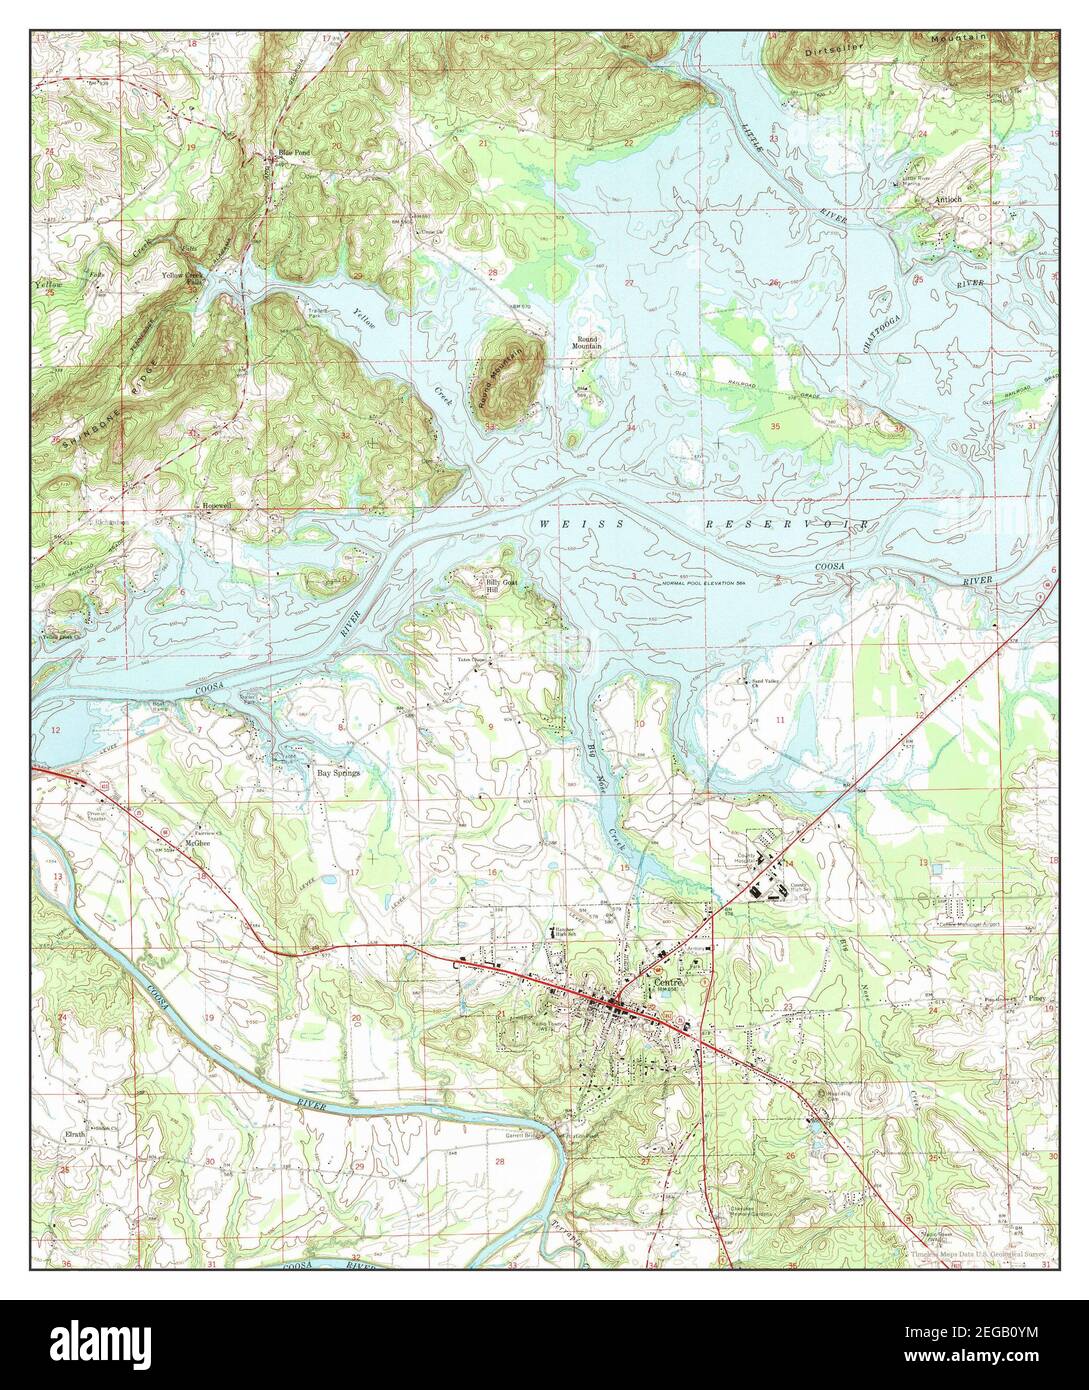 Centre, Alabama, map 1967, 1:24000, United States of America by Timeless Maps, data U.S. Geological Survey Stock Photo